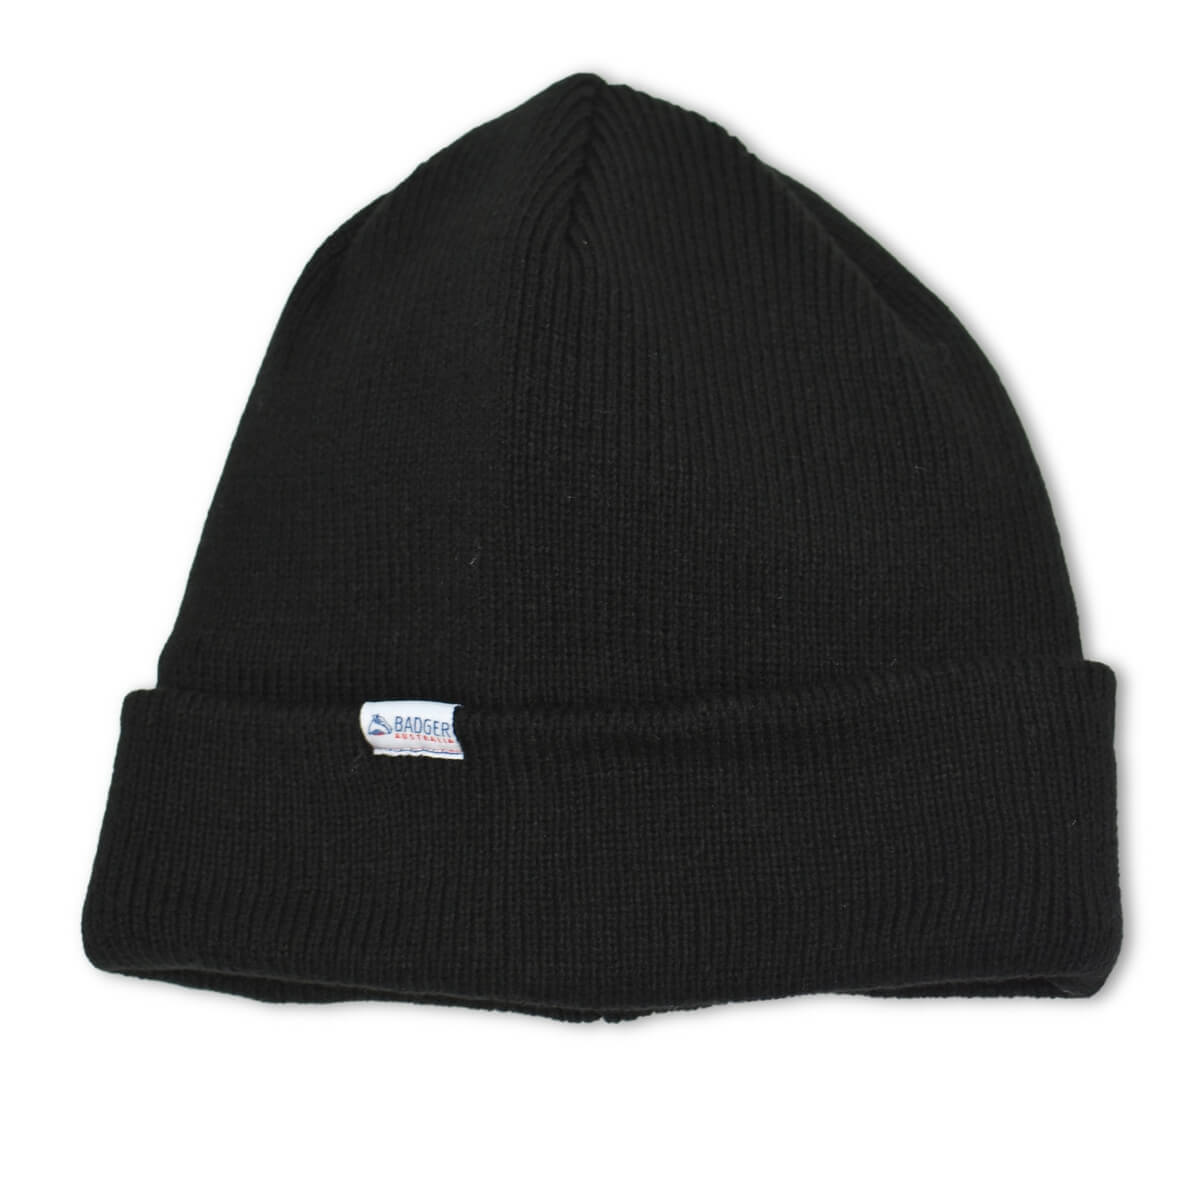 Badger Tight Knit Thermal Thinsulate Beanie - Badger Australia